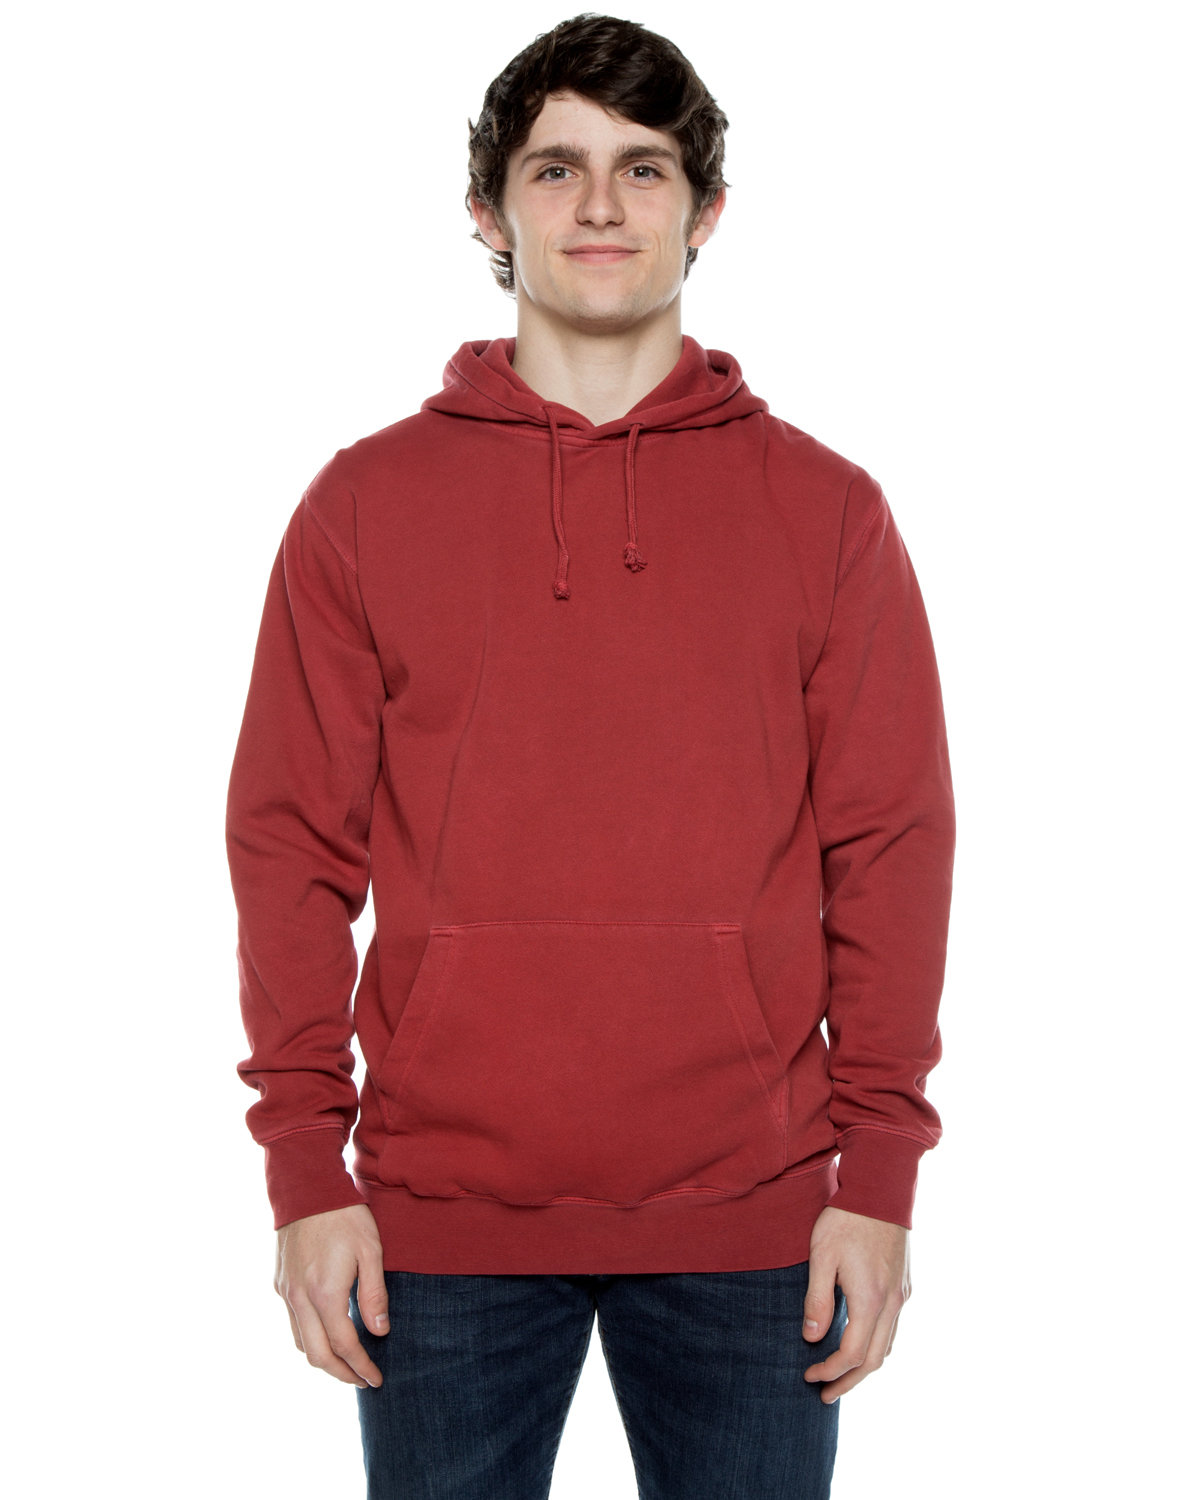 Beimar Drop Ship Unisex 8.25 oz. 80/20 Cotton/Poly Pigment-Dyed Hooded Sweatshirt RED 